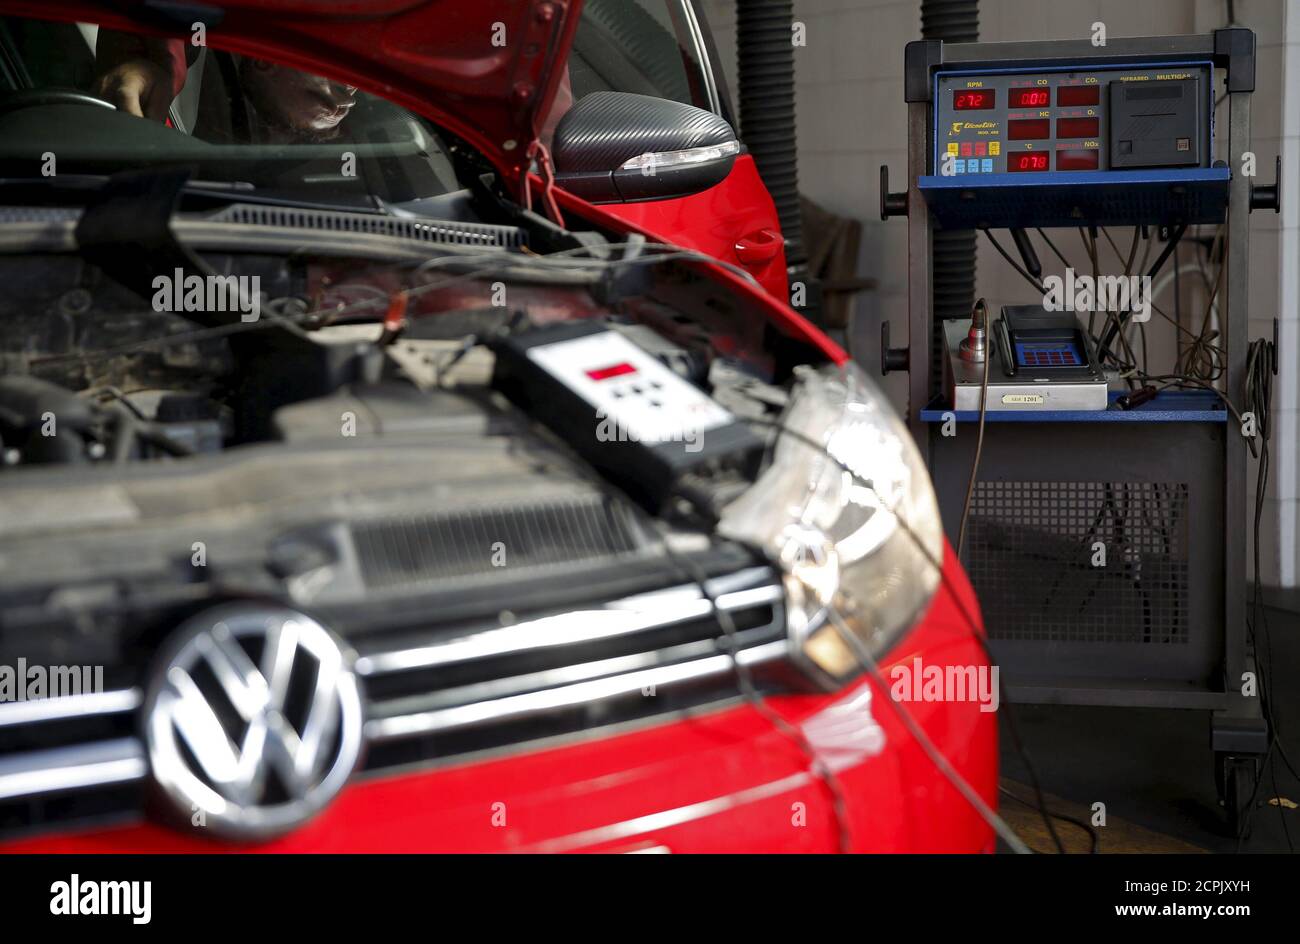 A Volkswagen car is pictured during a test at a technical and testing centre in Zenica, Bosnia and Herzegovina, September 23, 2015. Volkswagen Chief Executive Martin Winterkorn faces a reckoning with his board on Wednesday, summoned to explain the falsification of U.S. emissions tests in the biggest scandal in the 78-year history of the world's largest carmaker. The U.S. Environmental Protection Agency (EPA) said on Friday Volkswagen could face penalties of up to $18 billion for cheating emissions tests on some of its diesel cars. REUTERS/Dado Ruvic Stock Photo